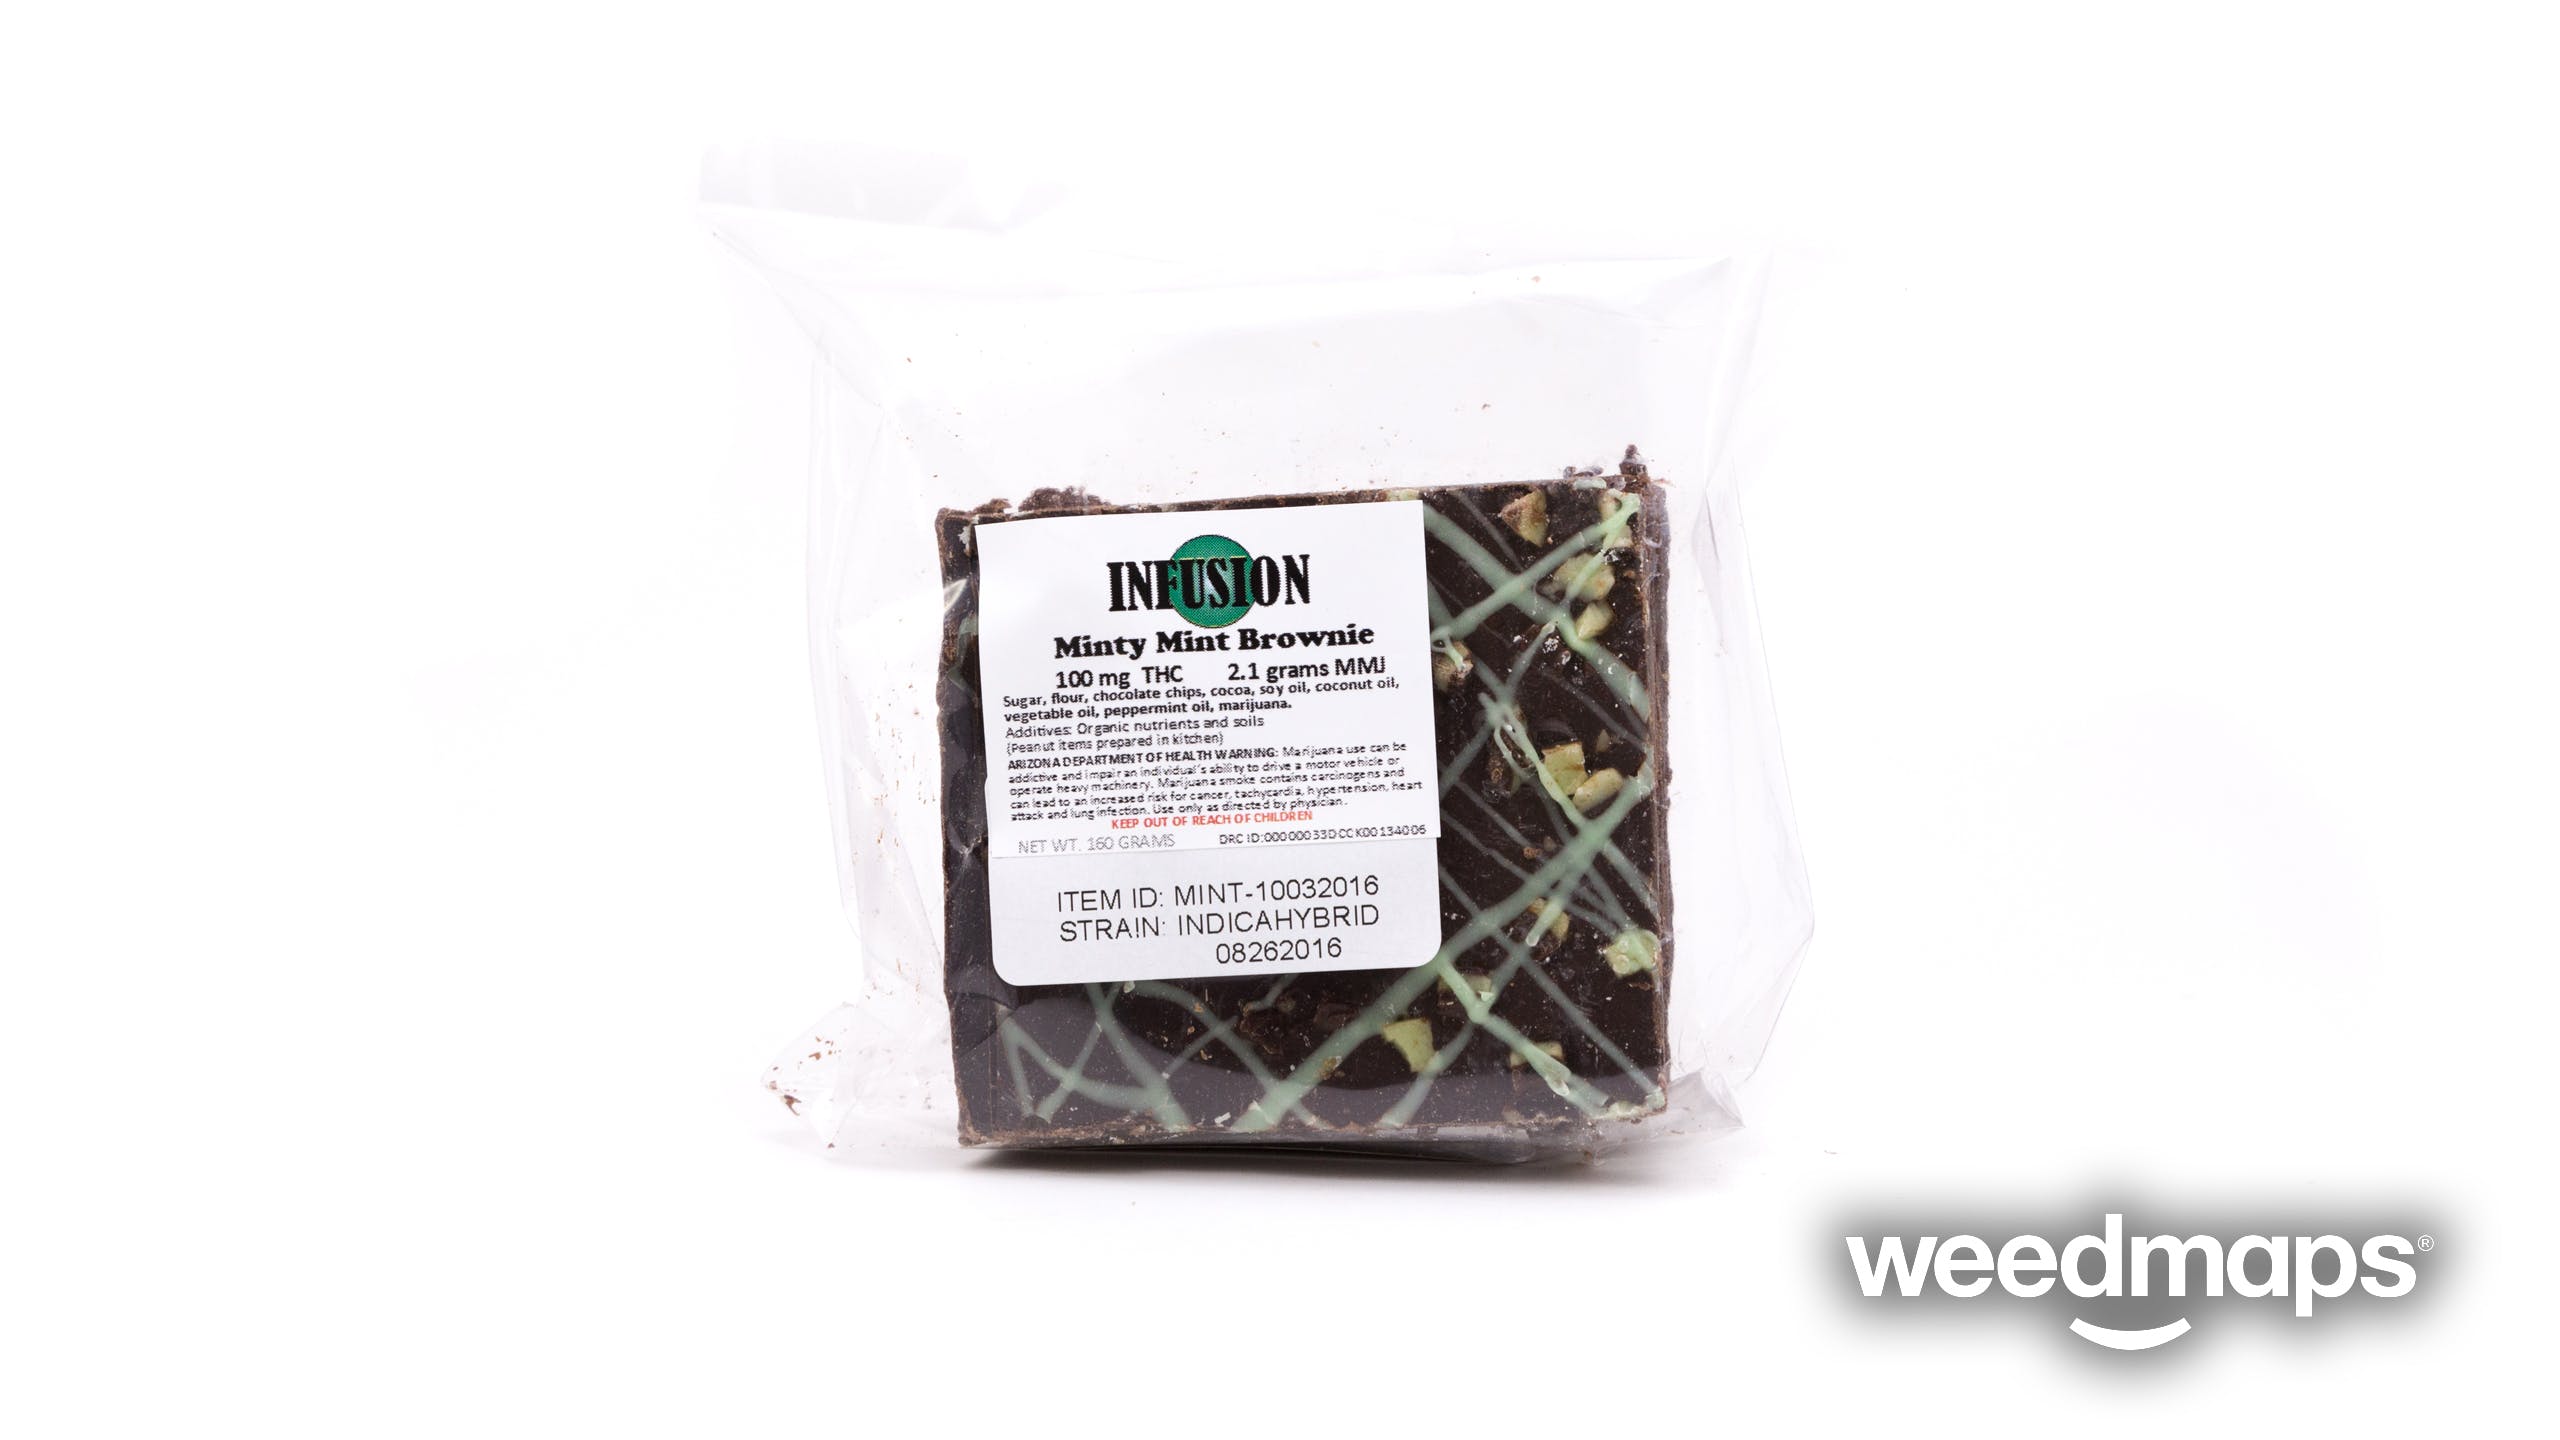 edible-infusion-minty-mint-brownie-100mg